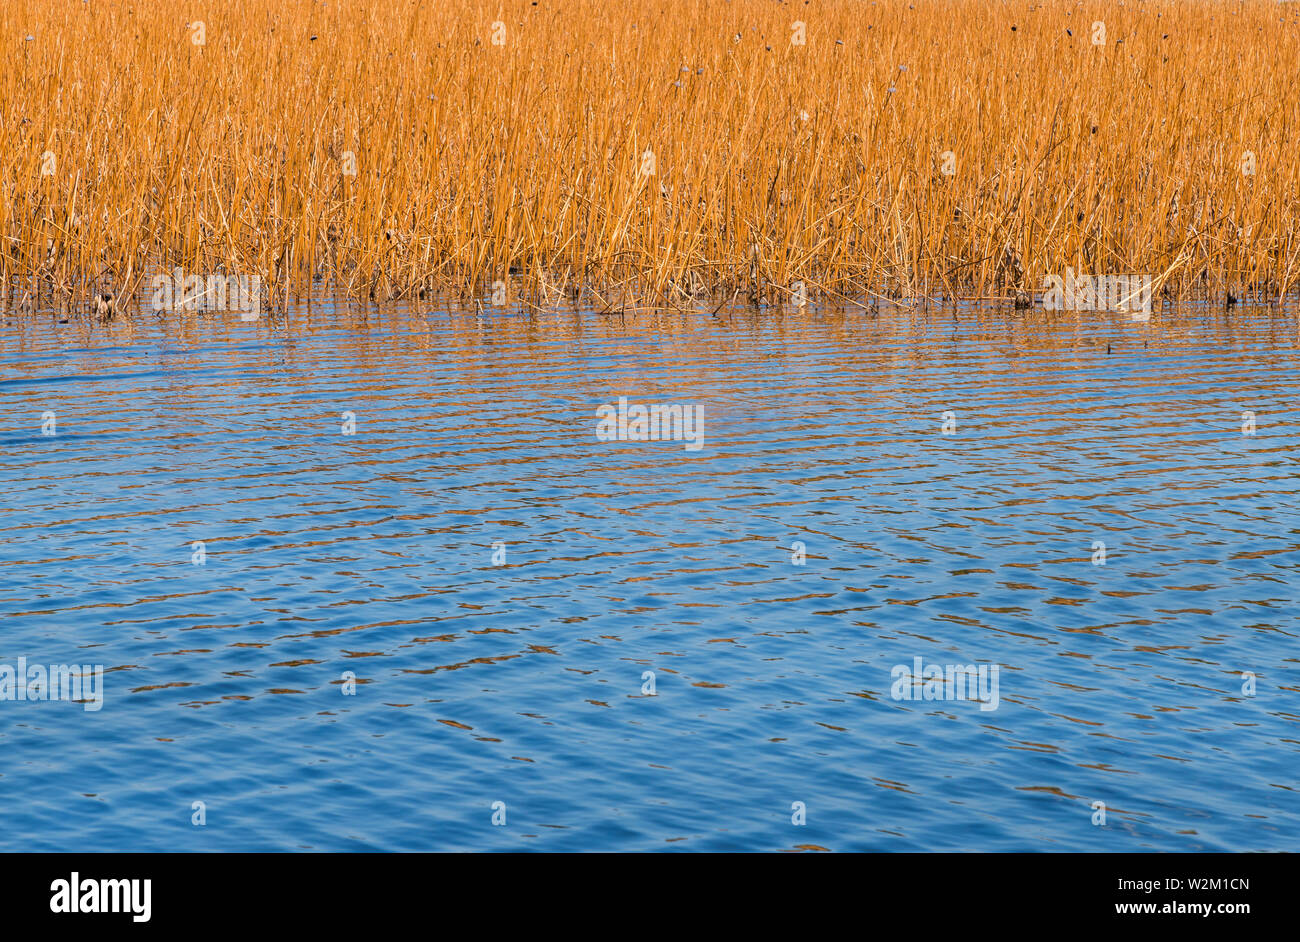 Pond water with dry canes and reeds as winter background Stock Photo